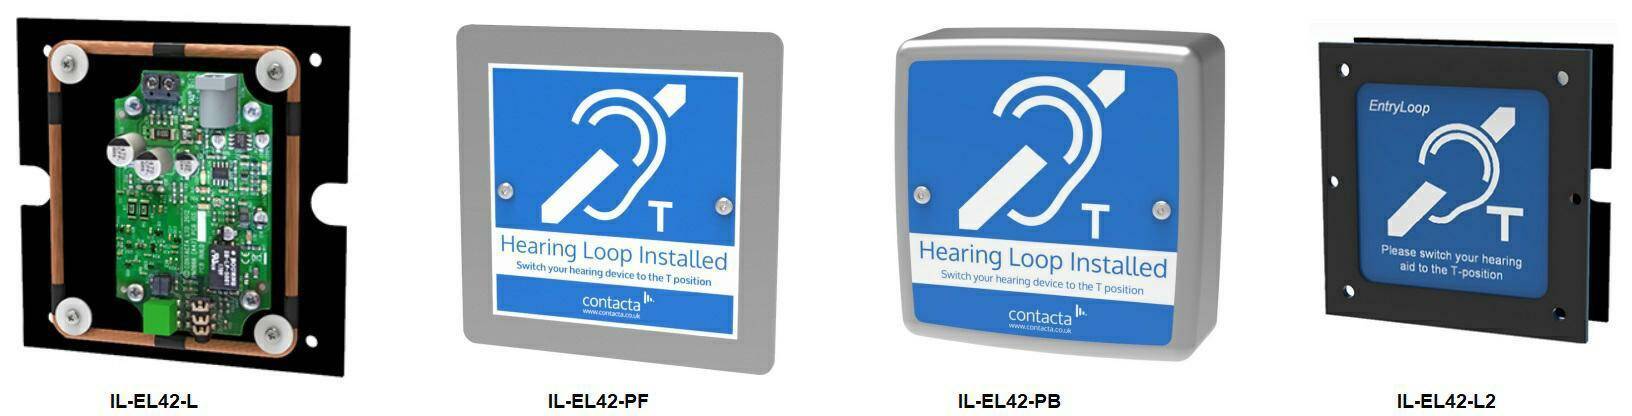 Inductive loop for installation in an infokiosk at a health centre or clinic